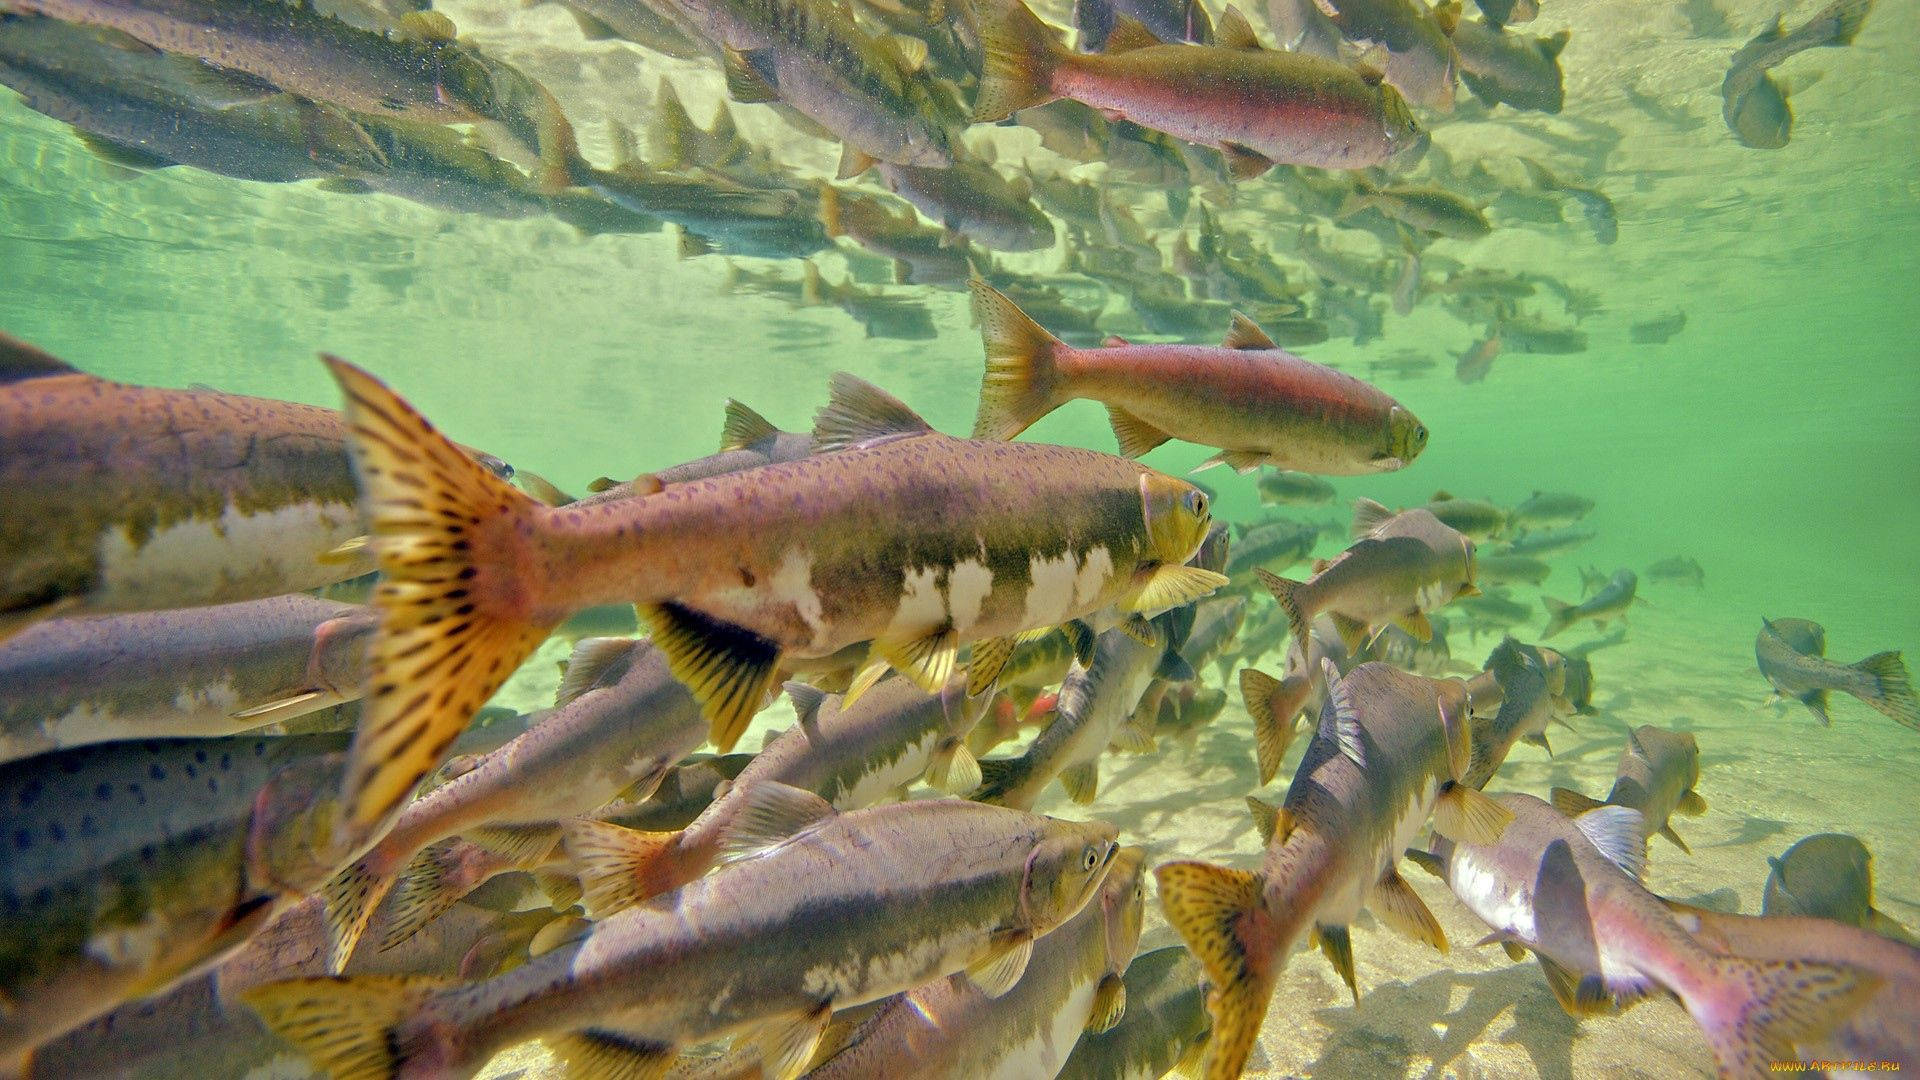 Group Of Fish In The River